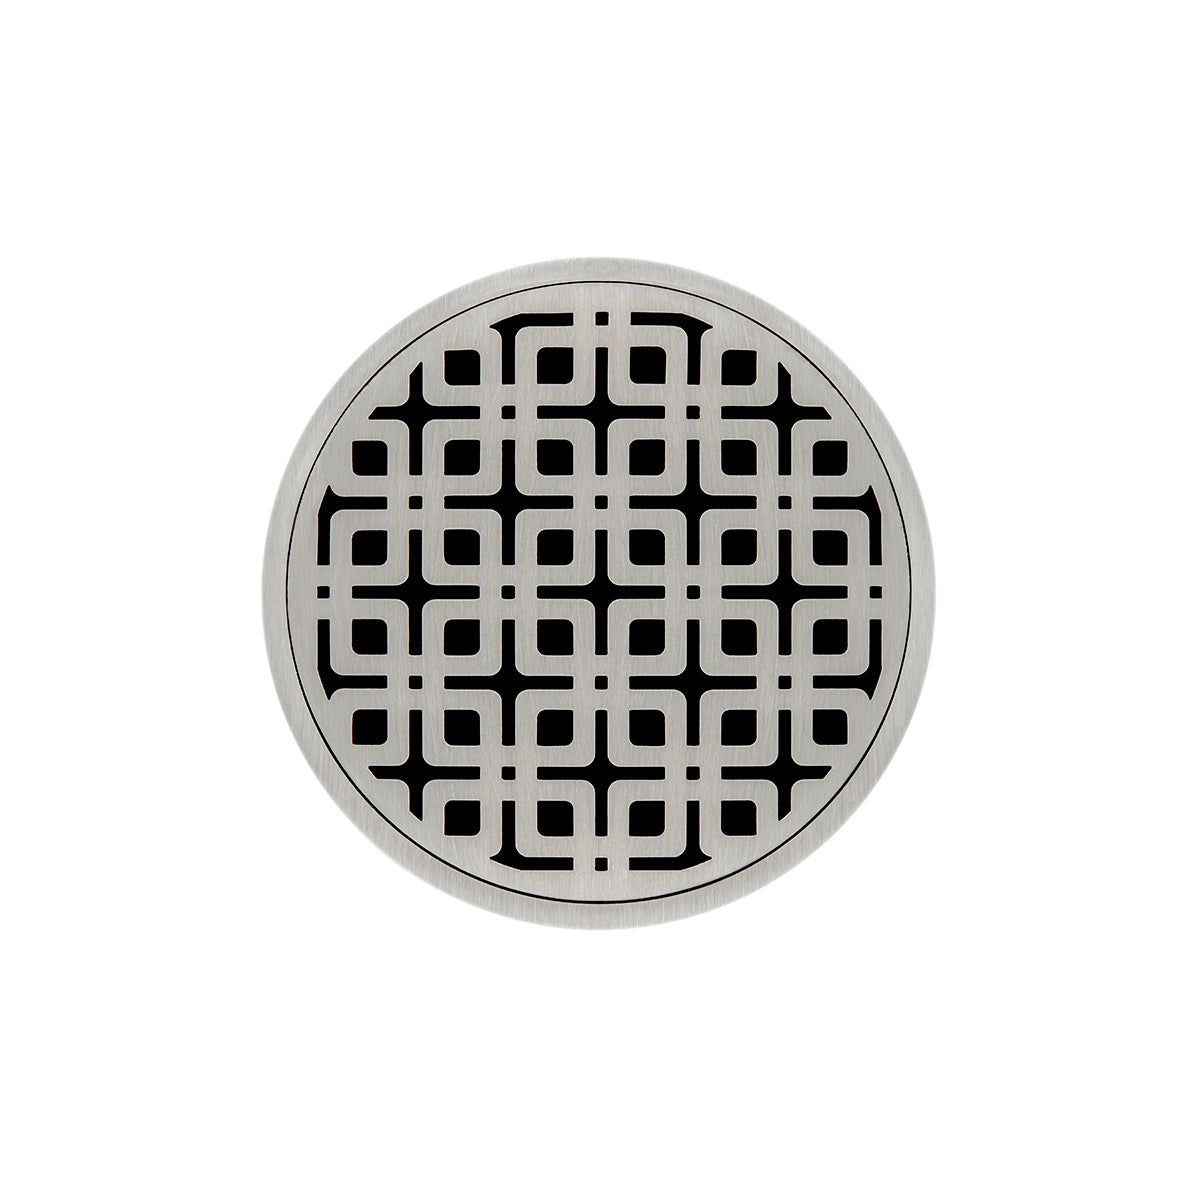 Infinity Drain 5" Round RKD 5 High Flow Premium Center Drain Kit with Link Pattern Decorative Plate with ABS Drain Body, 3" Outlet